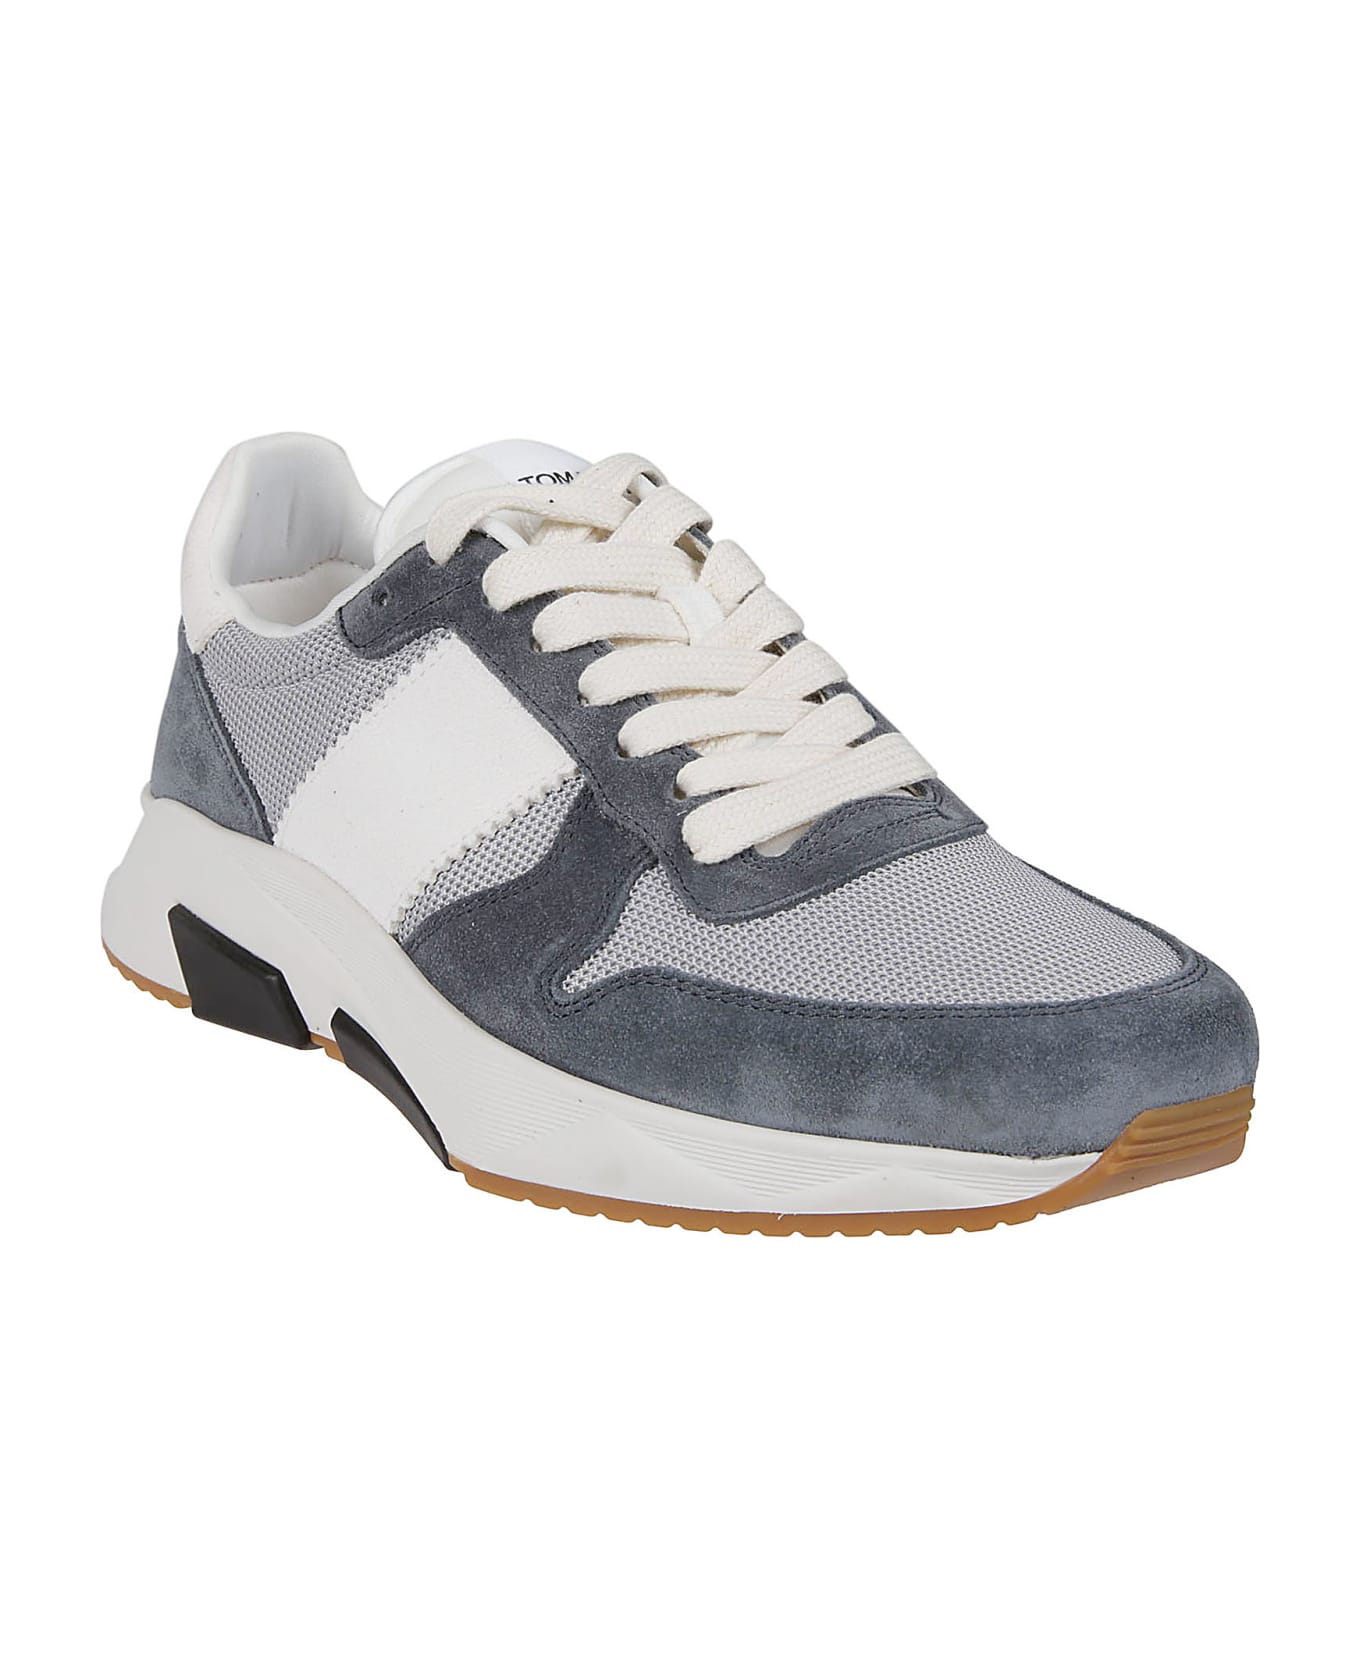 Tom Ford Jago Low Top Sneakers - Silver/petrol Blue/white スニーカー